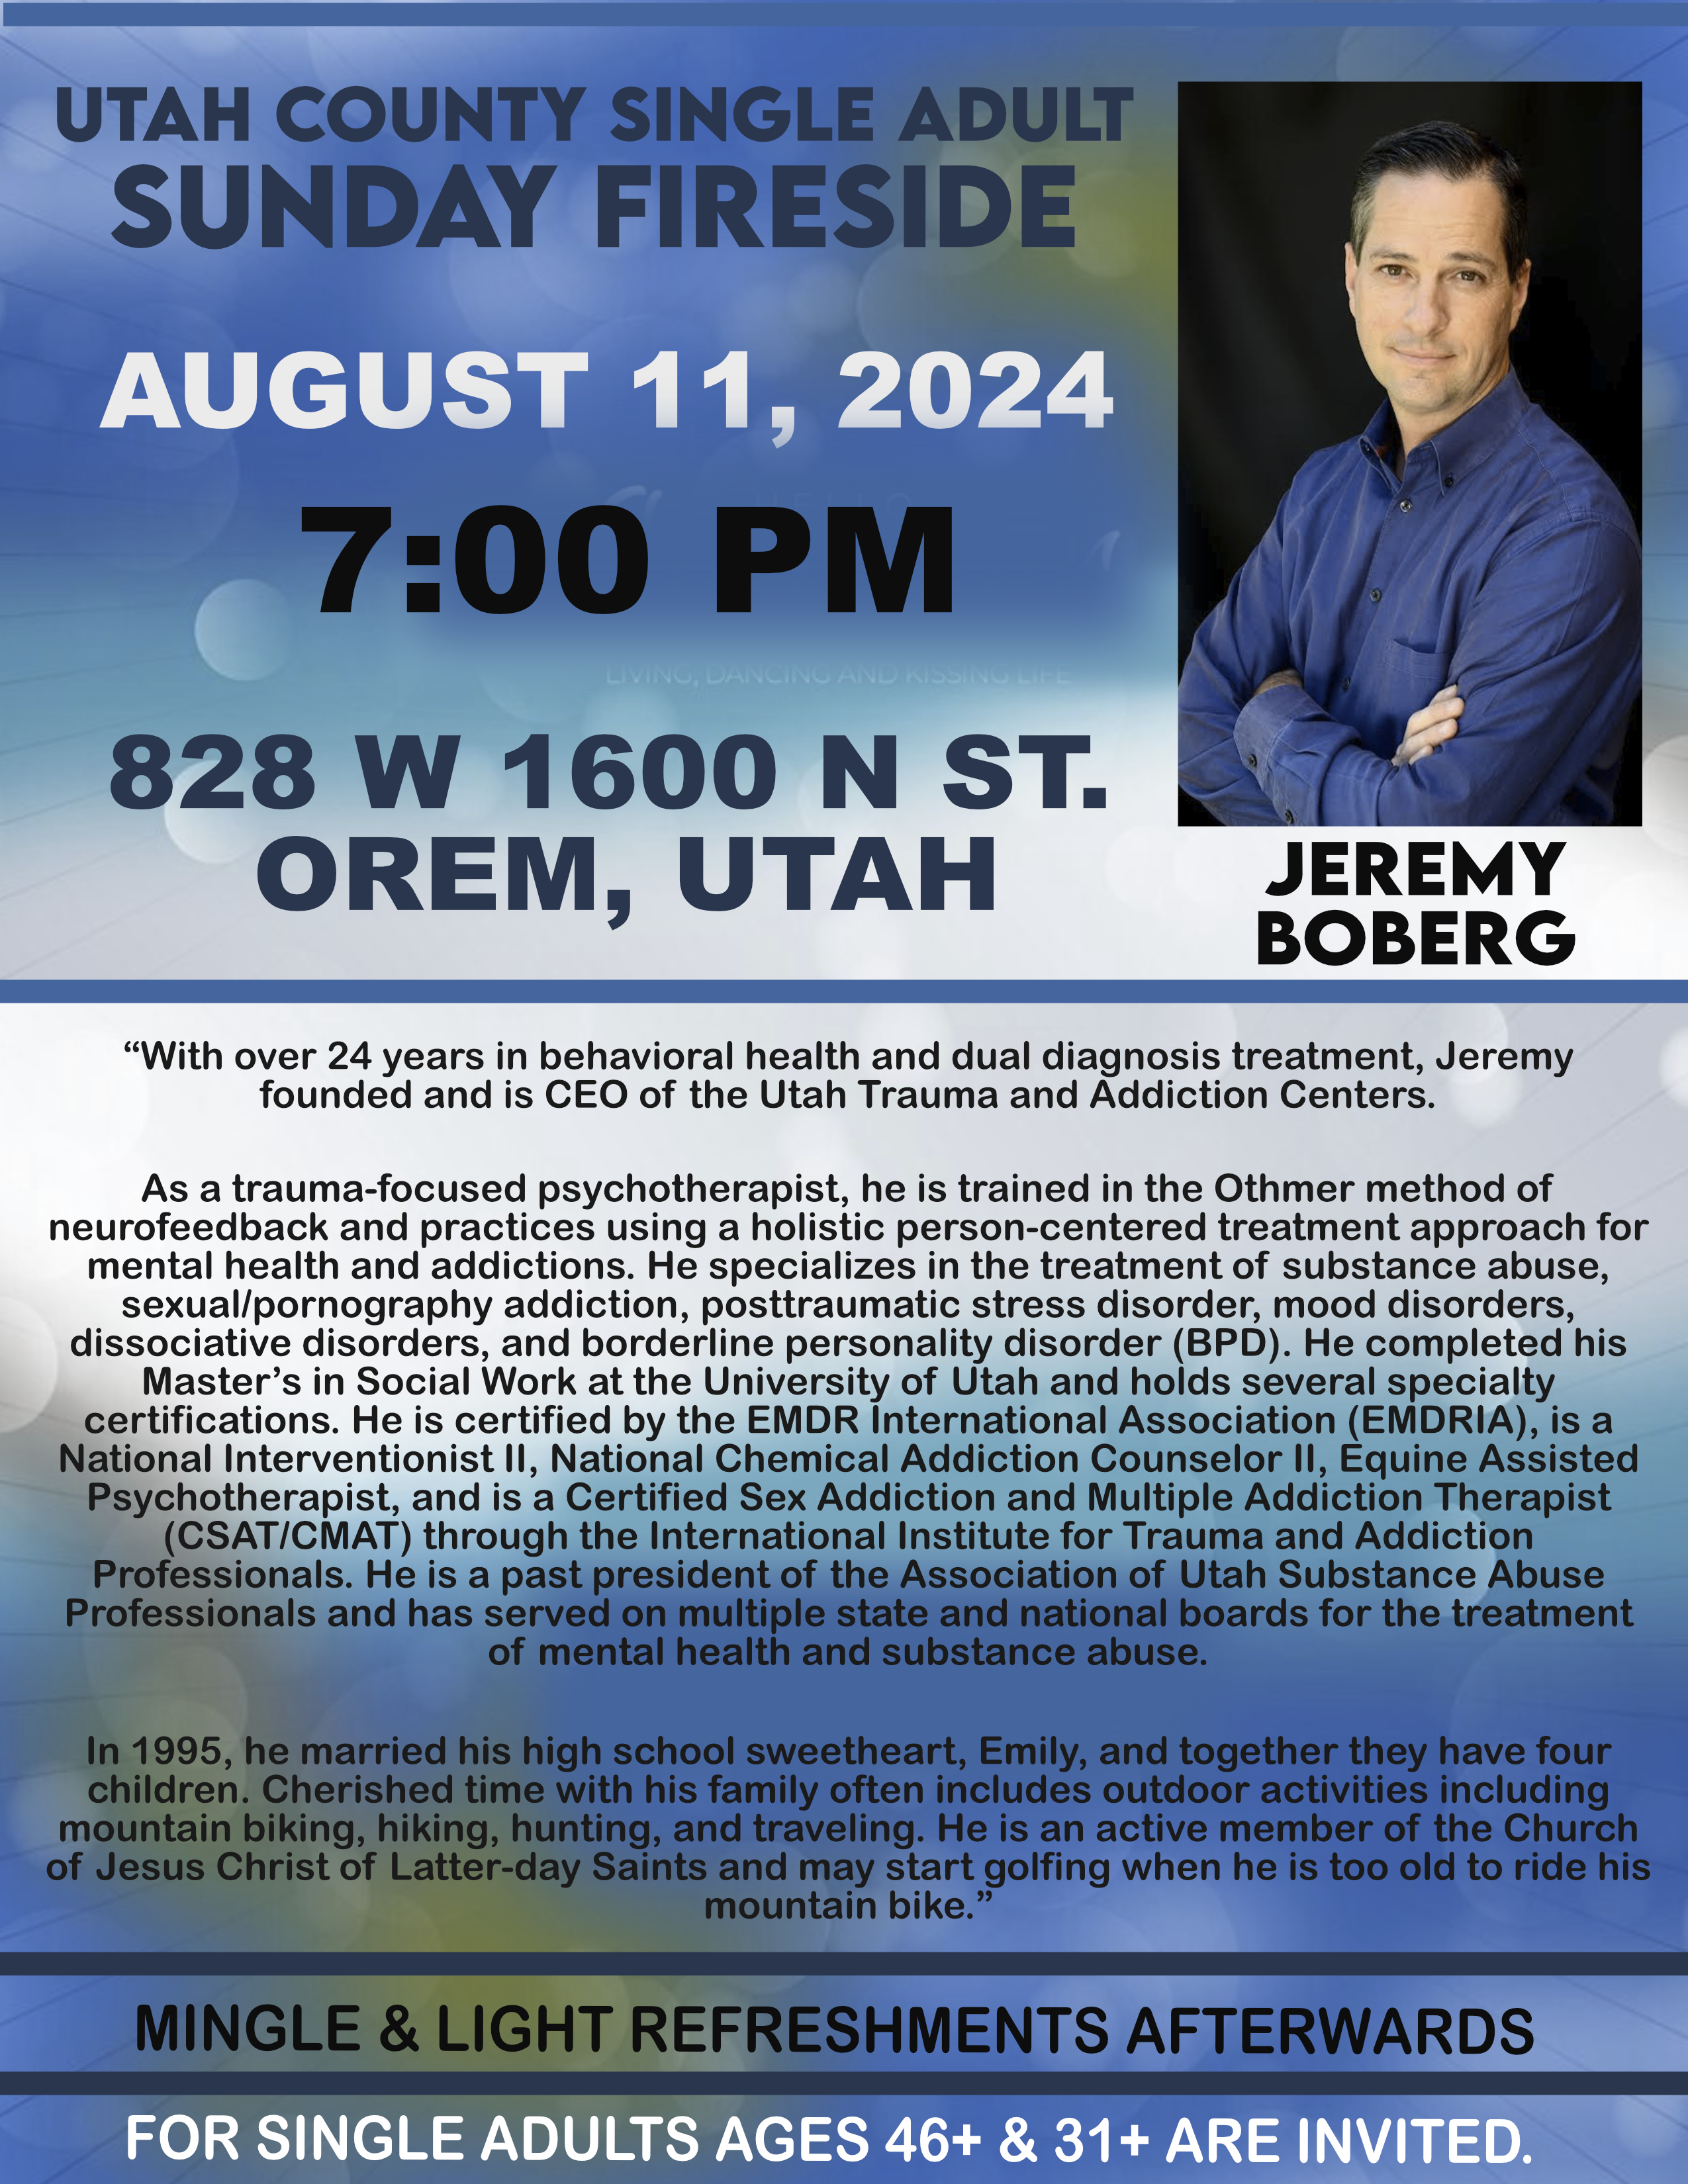 upcoming fireside on Aug 11, 2024 with Jeremy Boberg